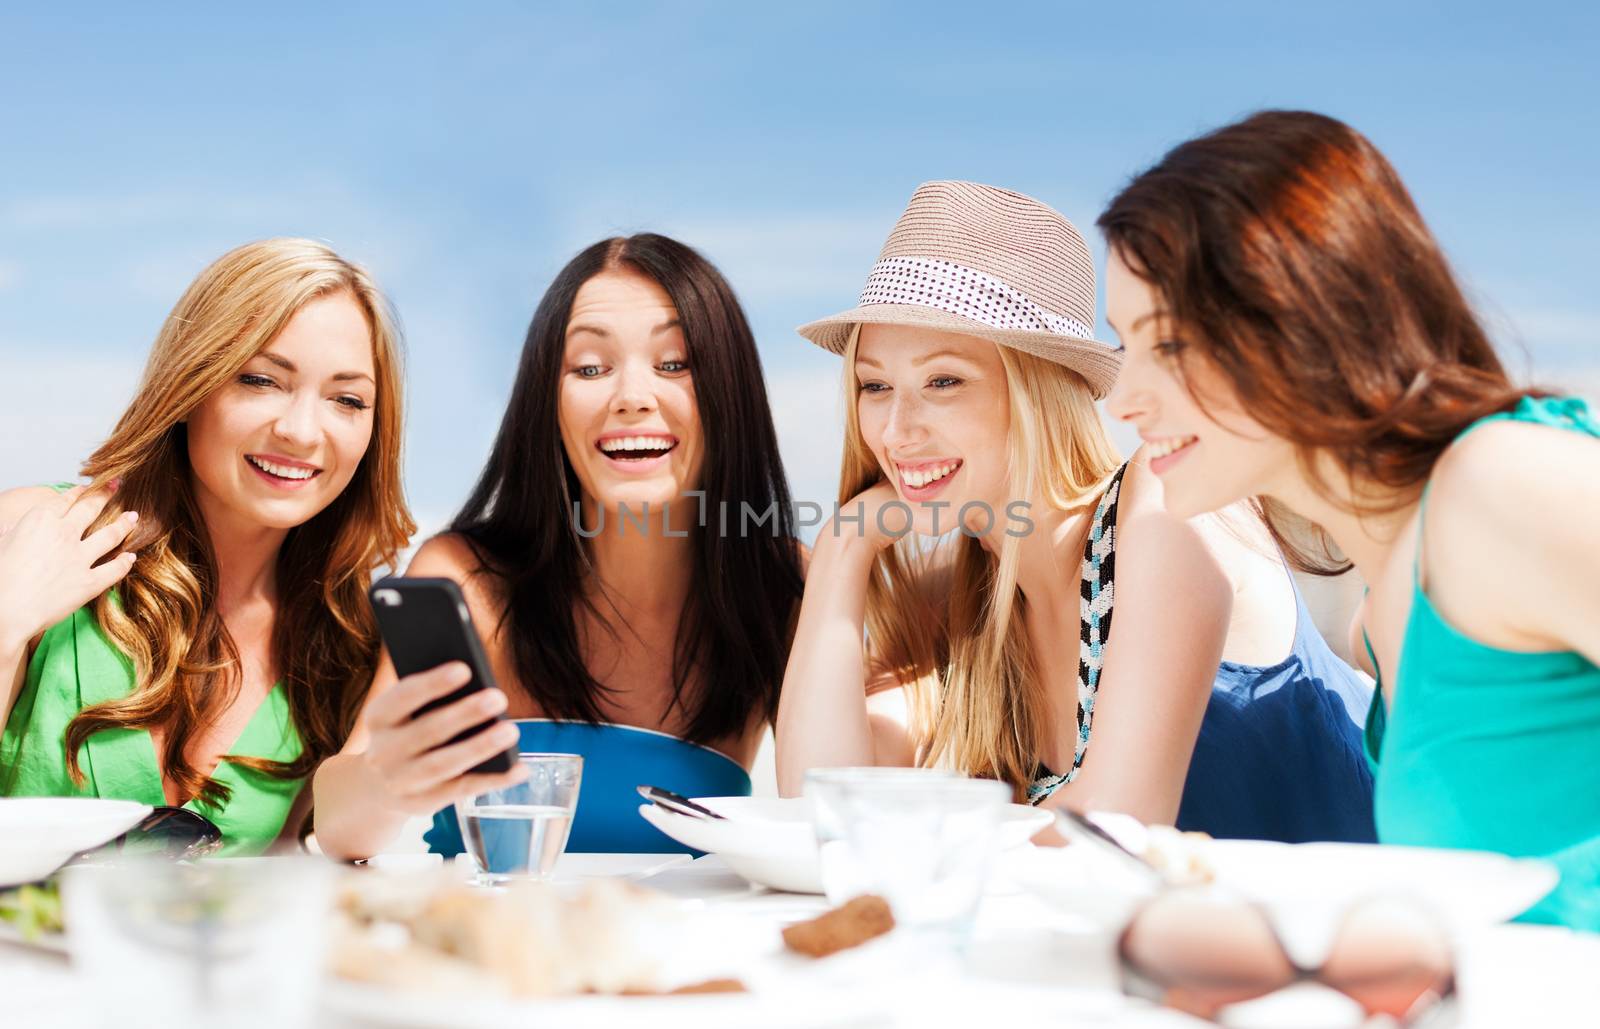 girls looking at smartphone in cafe on the beach by dolgachov